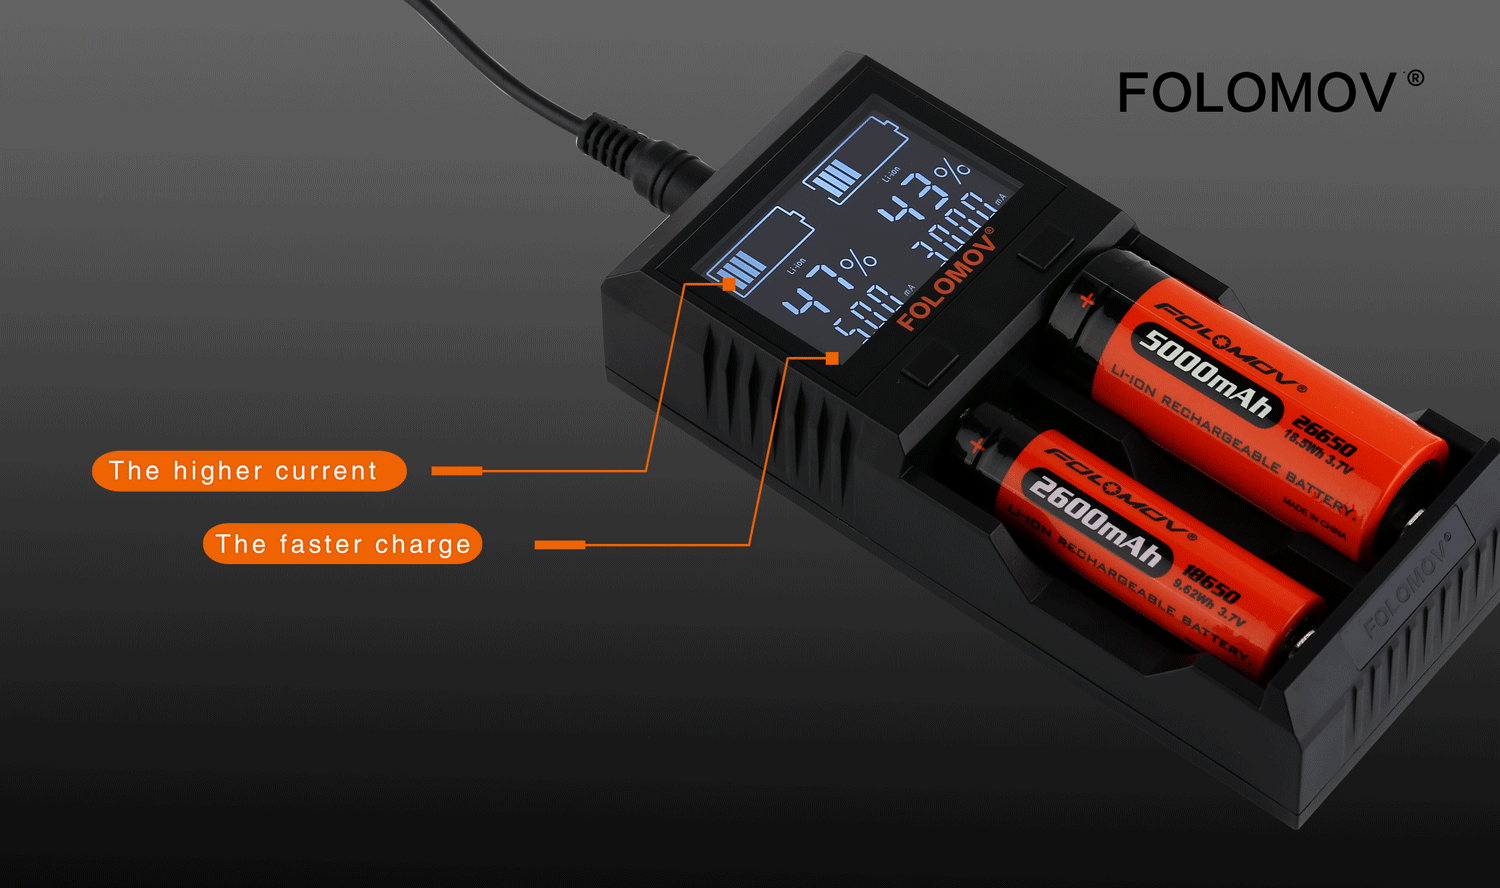 Folomov A2 Smart Quick Charger with LCD Screen FOLOMOV The higher current The faster charge